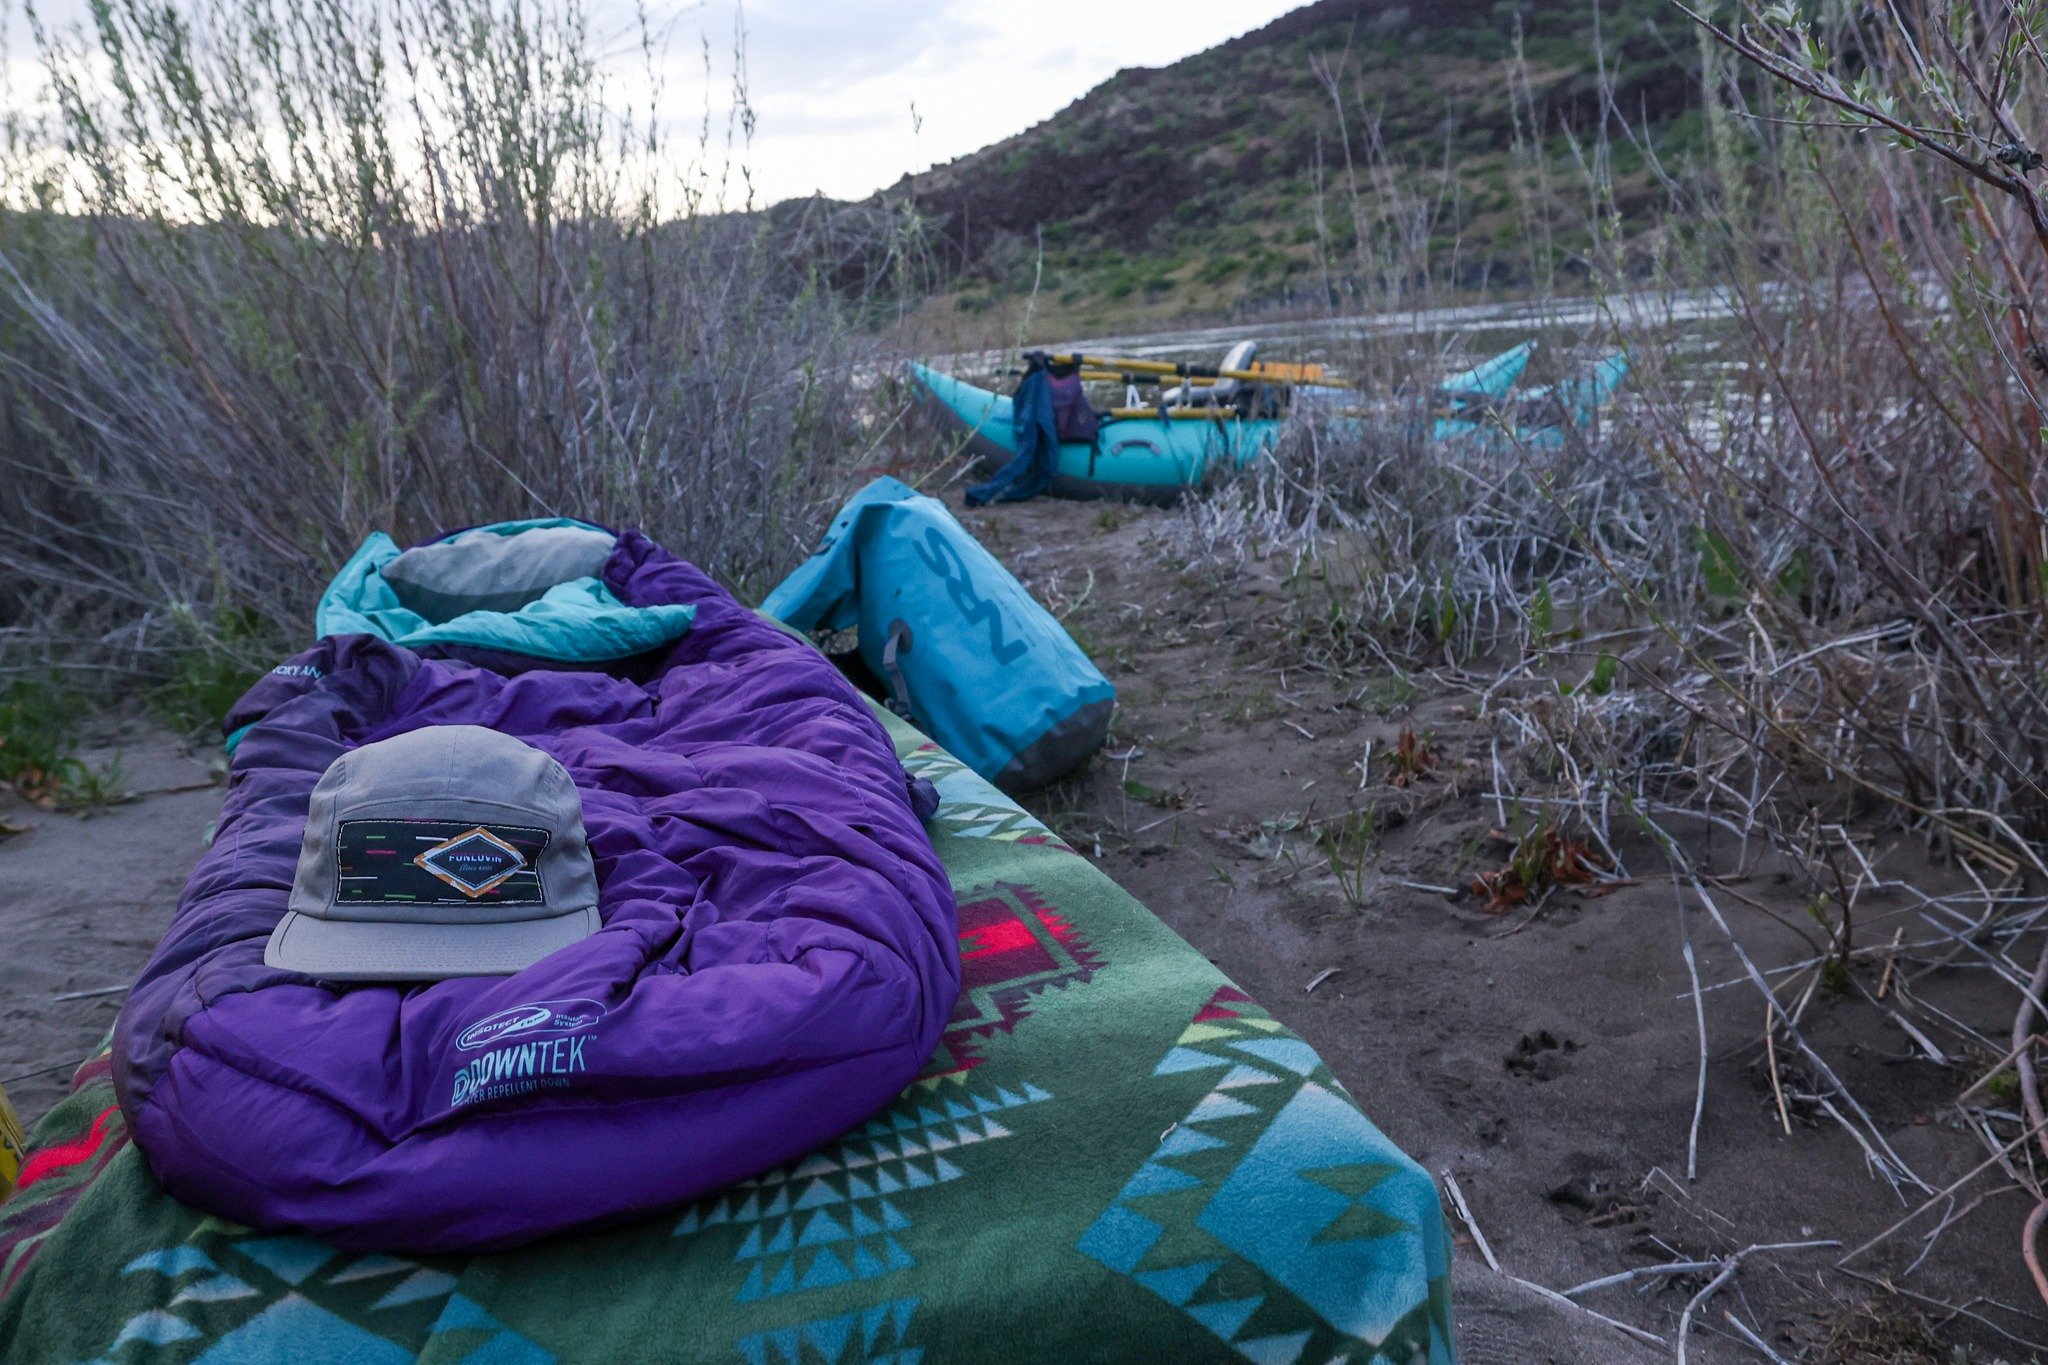 Cot living on the Owyhee River!! Nothing beats sleeping out, next to a beautiful river, with the coziest bed!

Don't forget!  Our entire Website is on sale!  Enter code LOVEYOURMOMMA at checkout for 20% off. 

This is a great chance to treat yourself